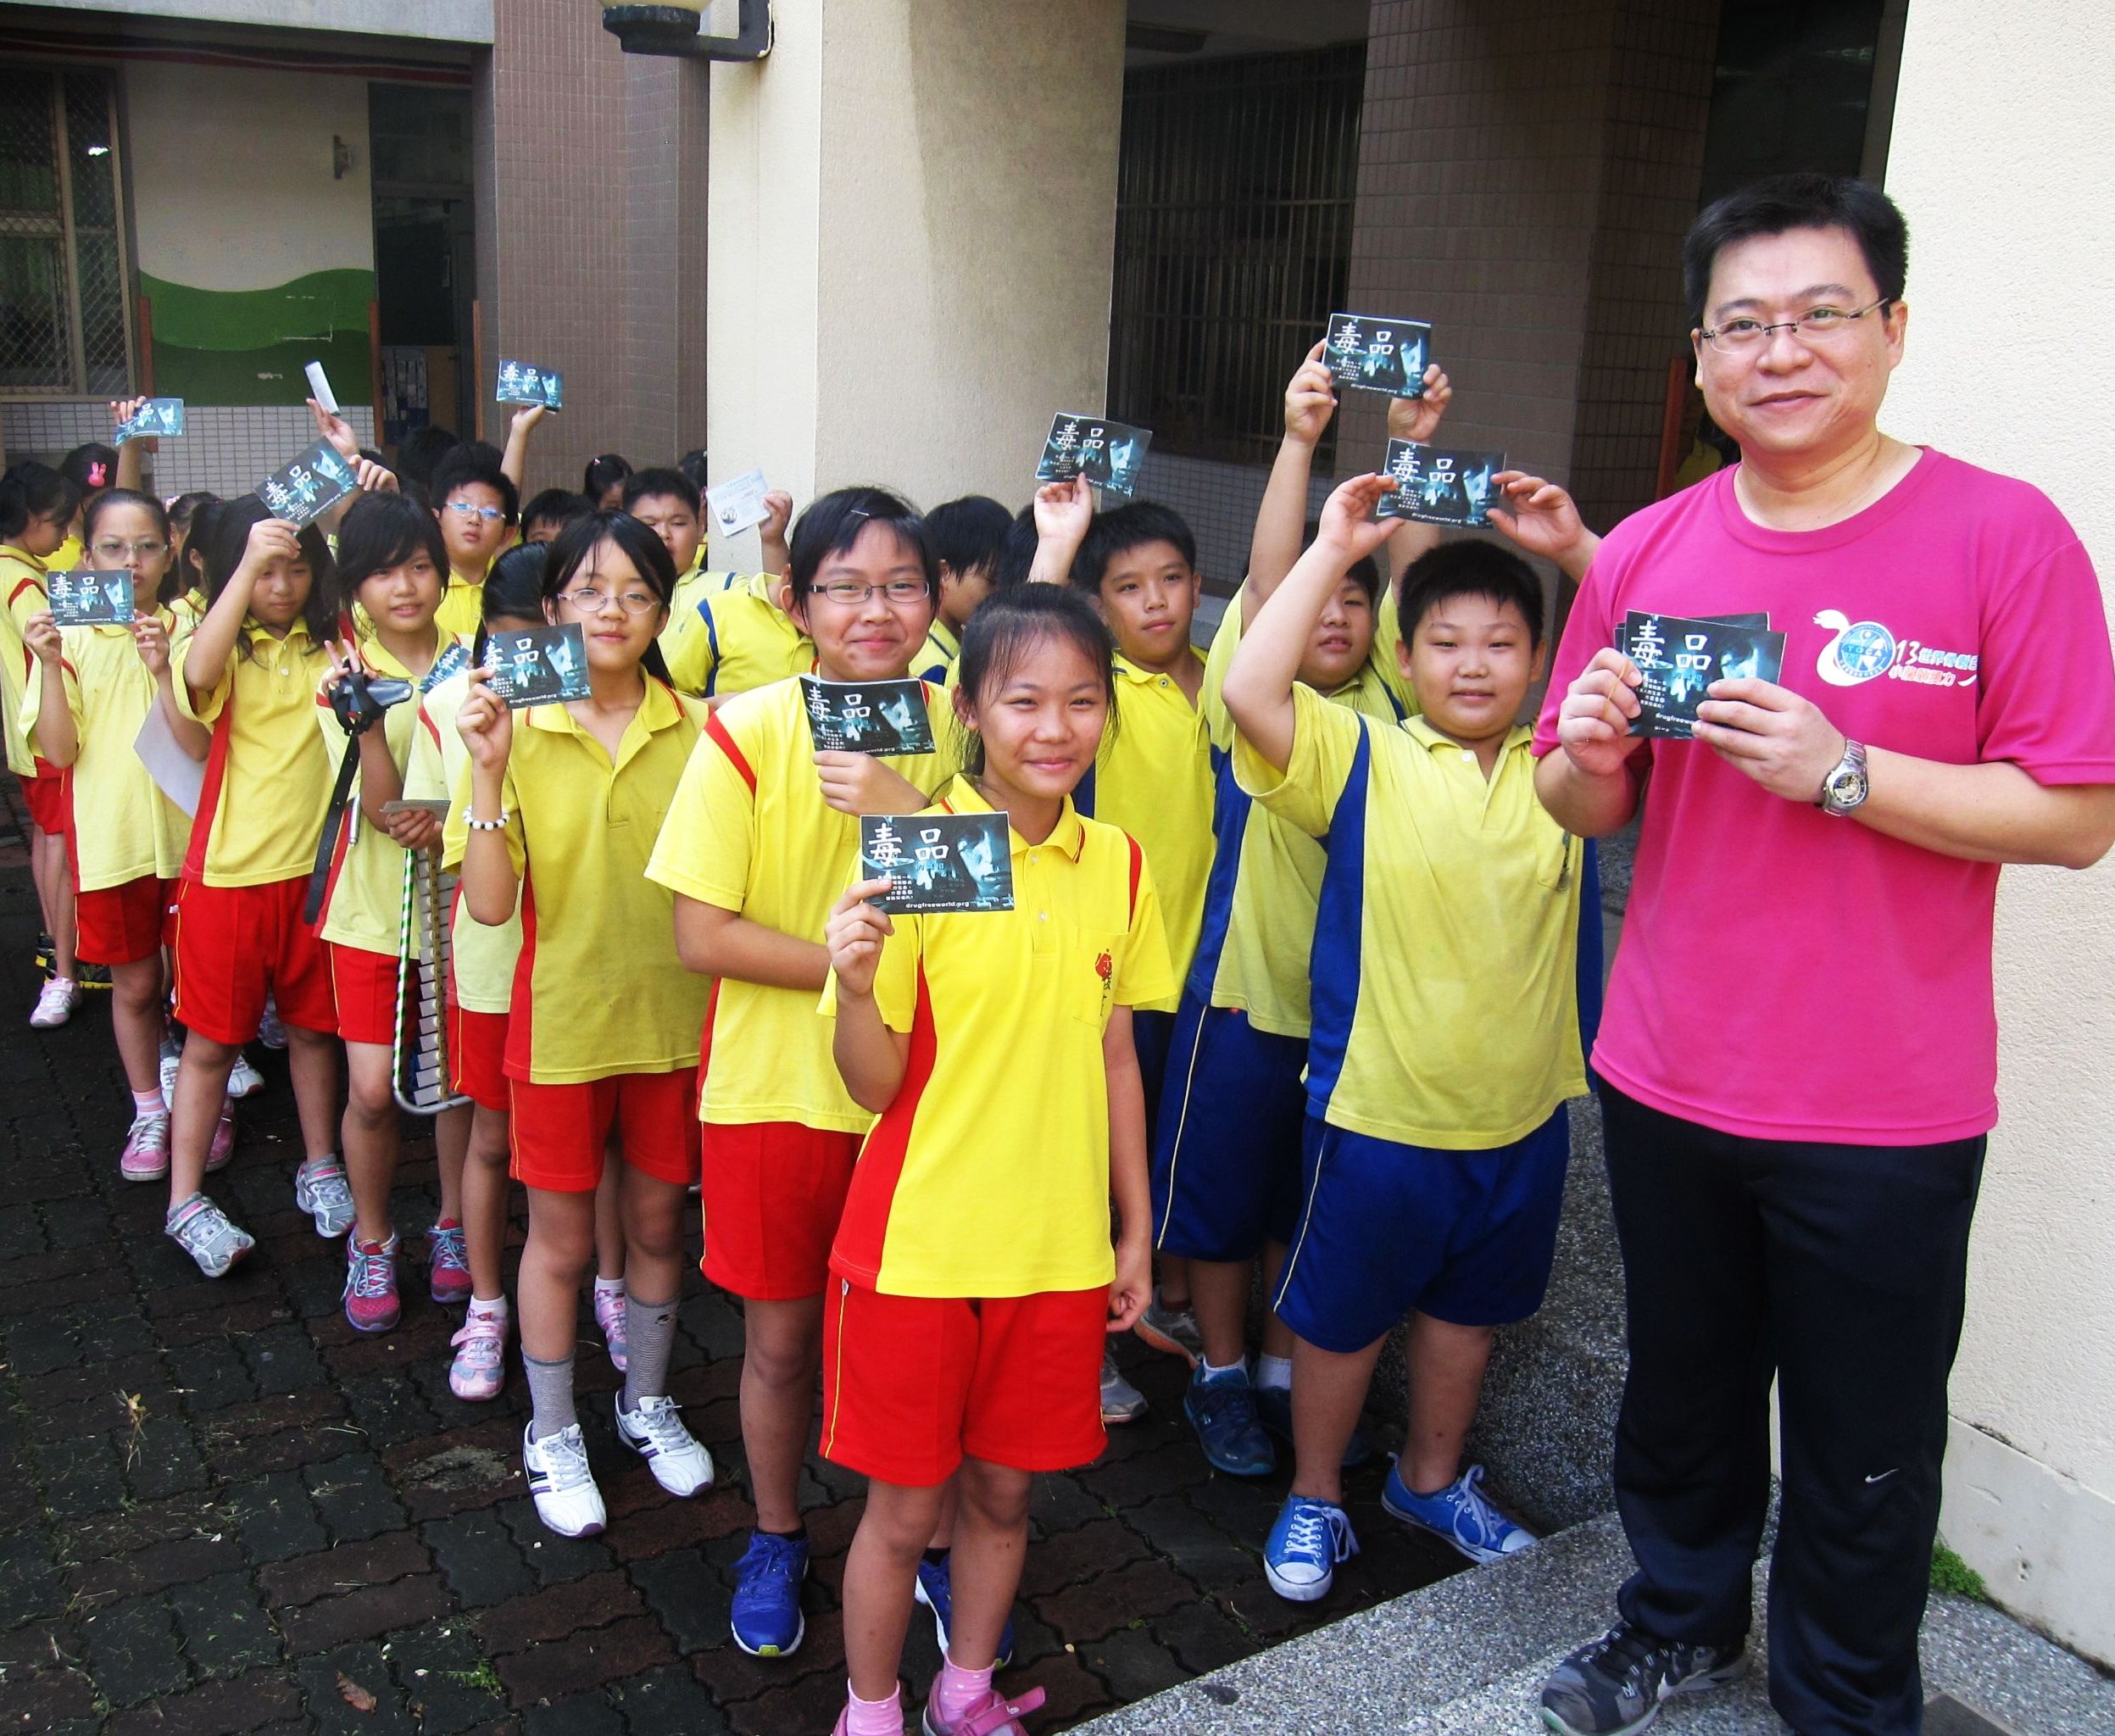 Gyugong Elementary School teacher launches the summer with The Truth About Drugs booklets at a program organized by the Church of Scientology of Kaohsiung.